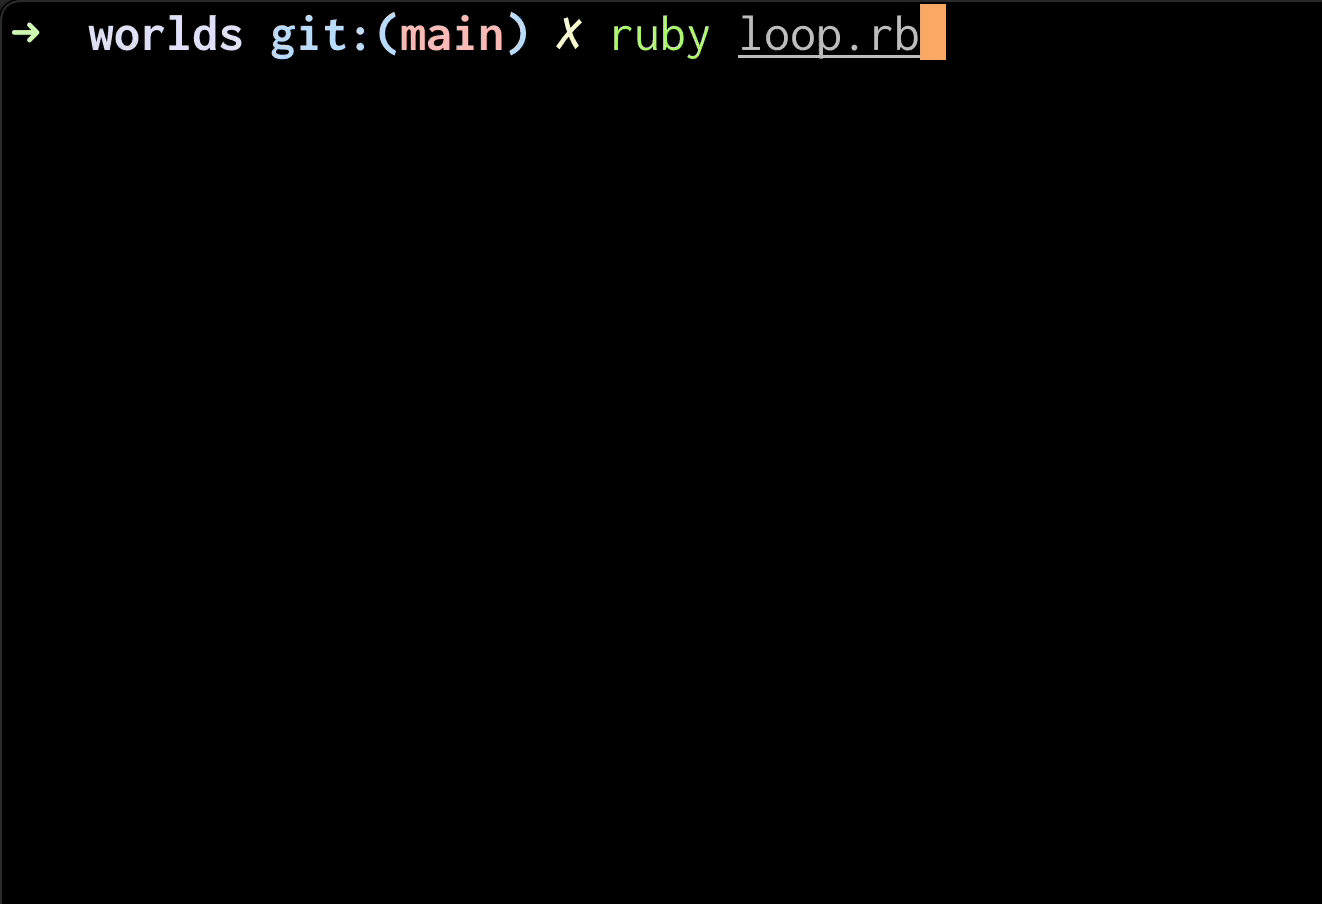 A simple text-based game in the terminal, where output is appearing while input is being typed.